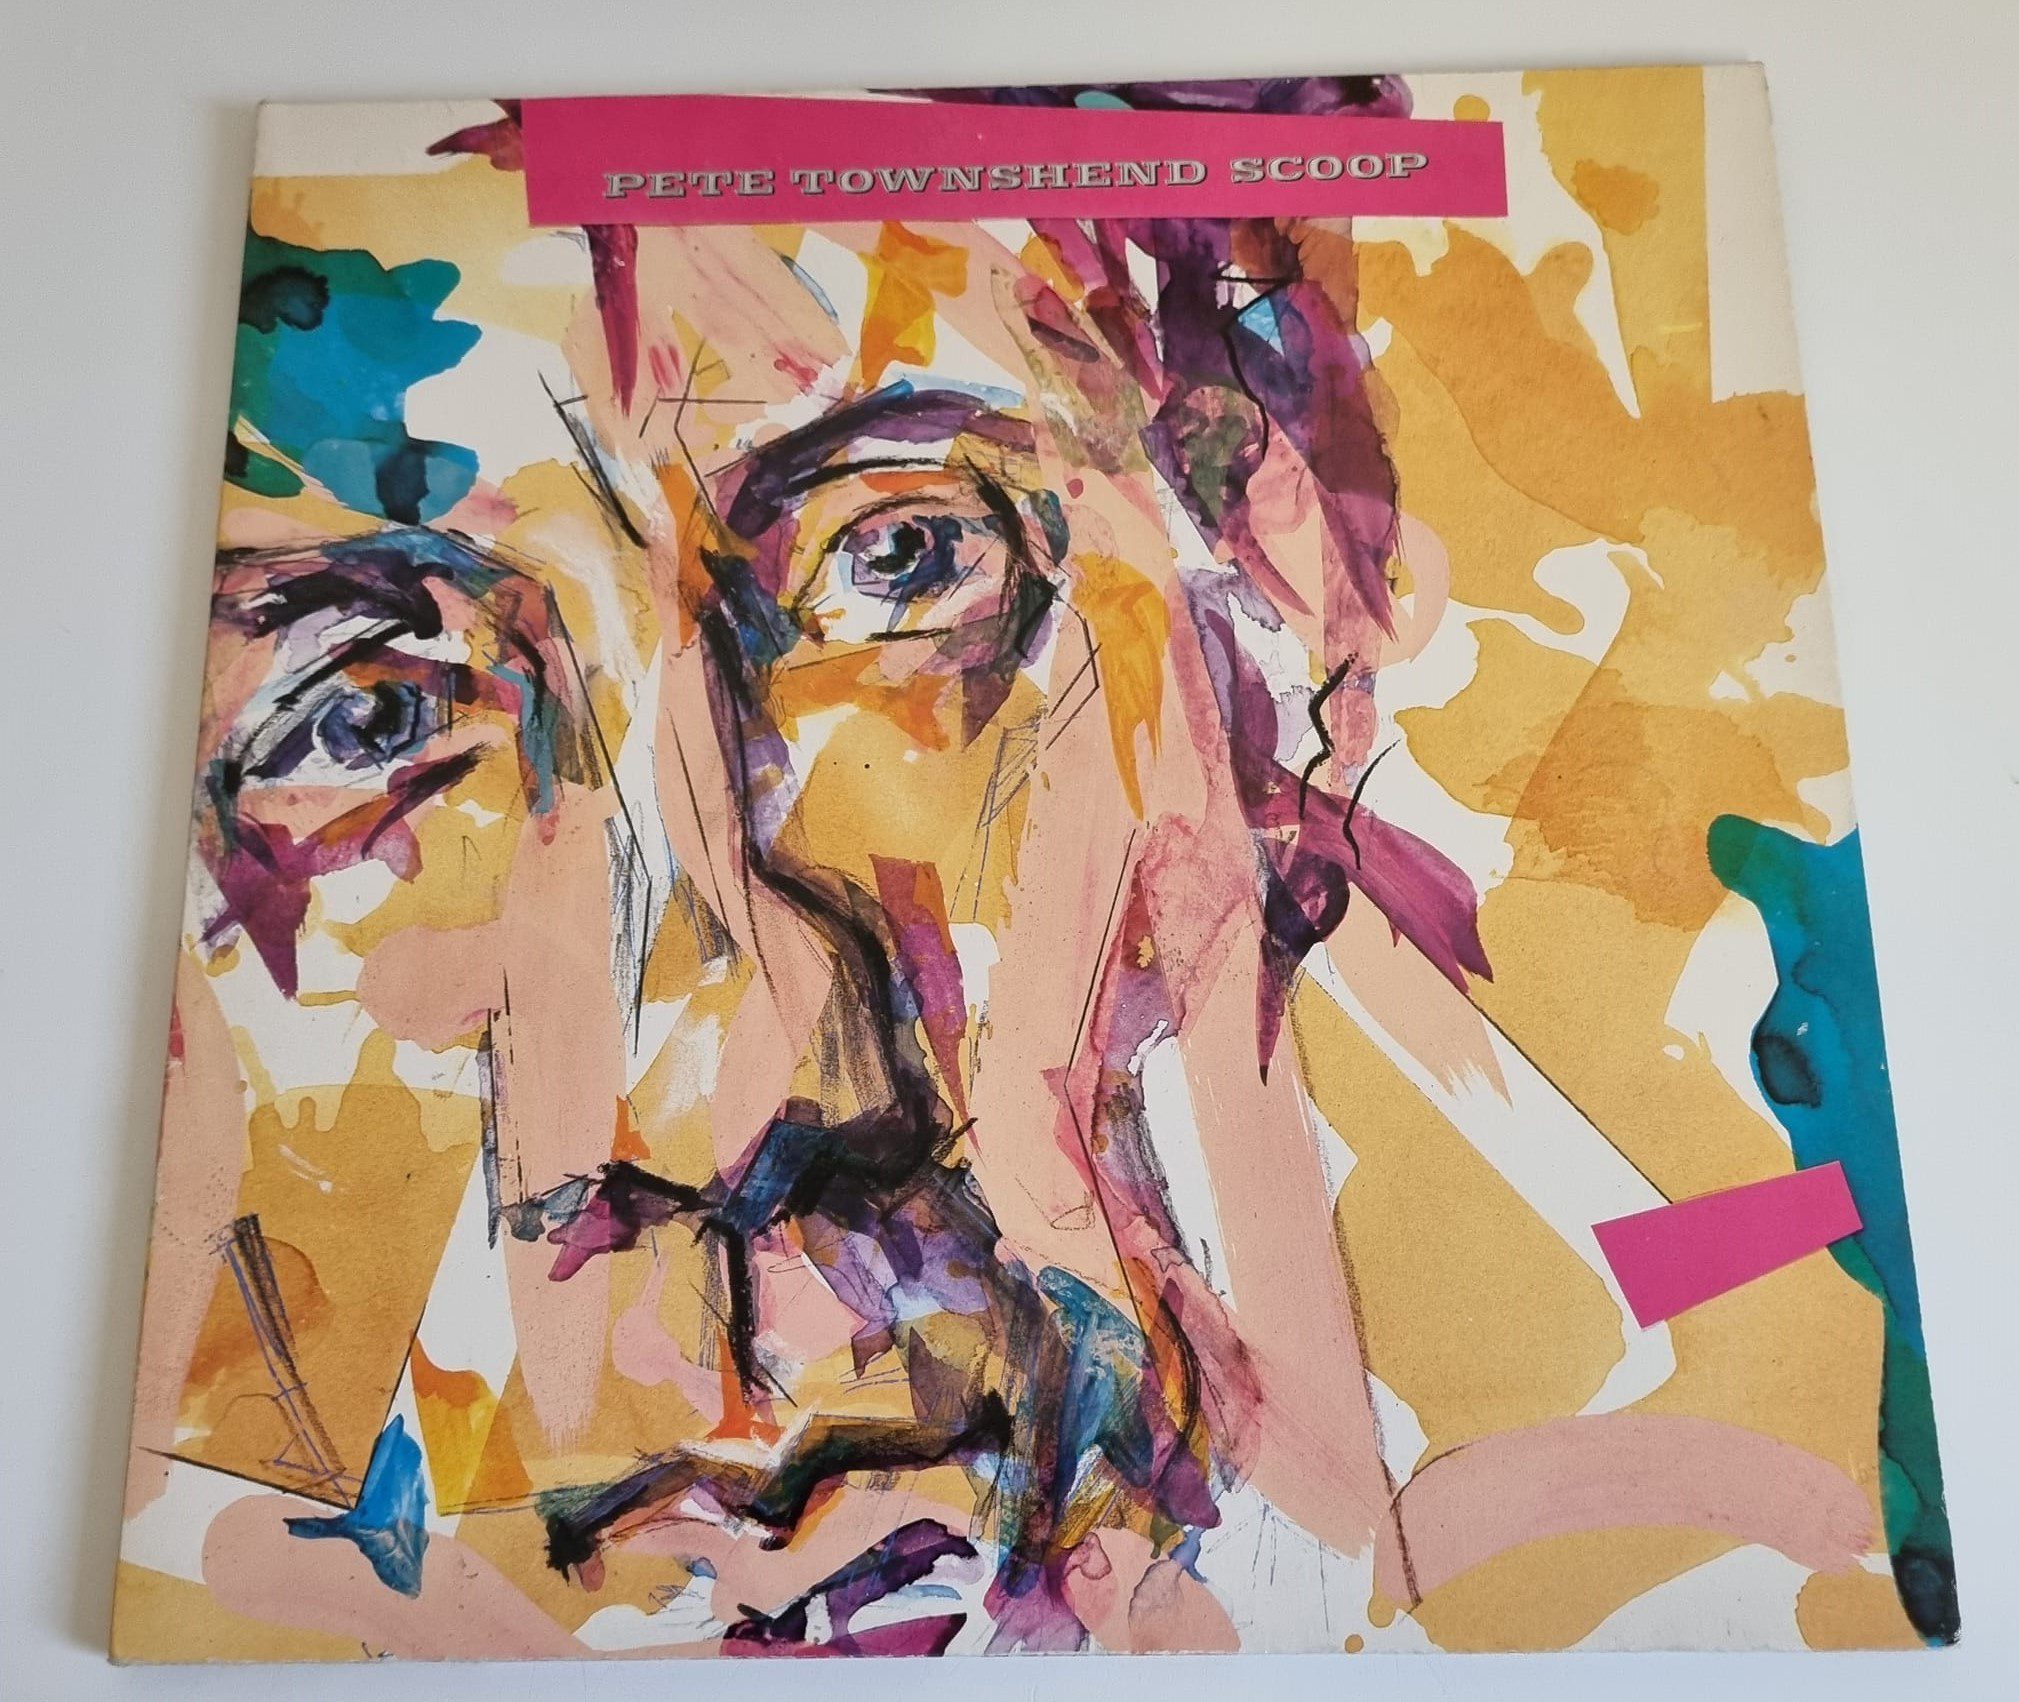 Buy this rare Pete Townshend record by clicking here